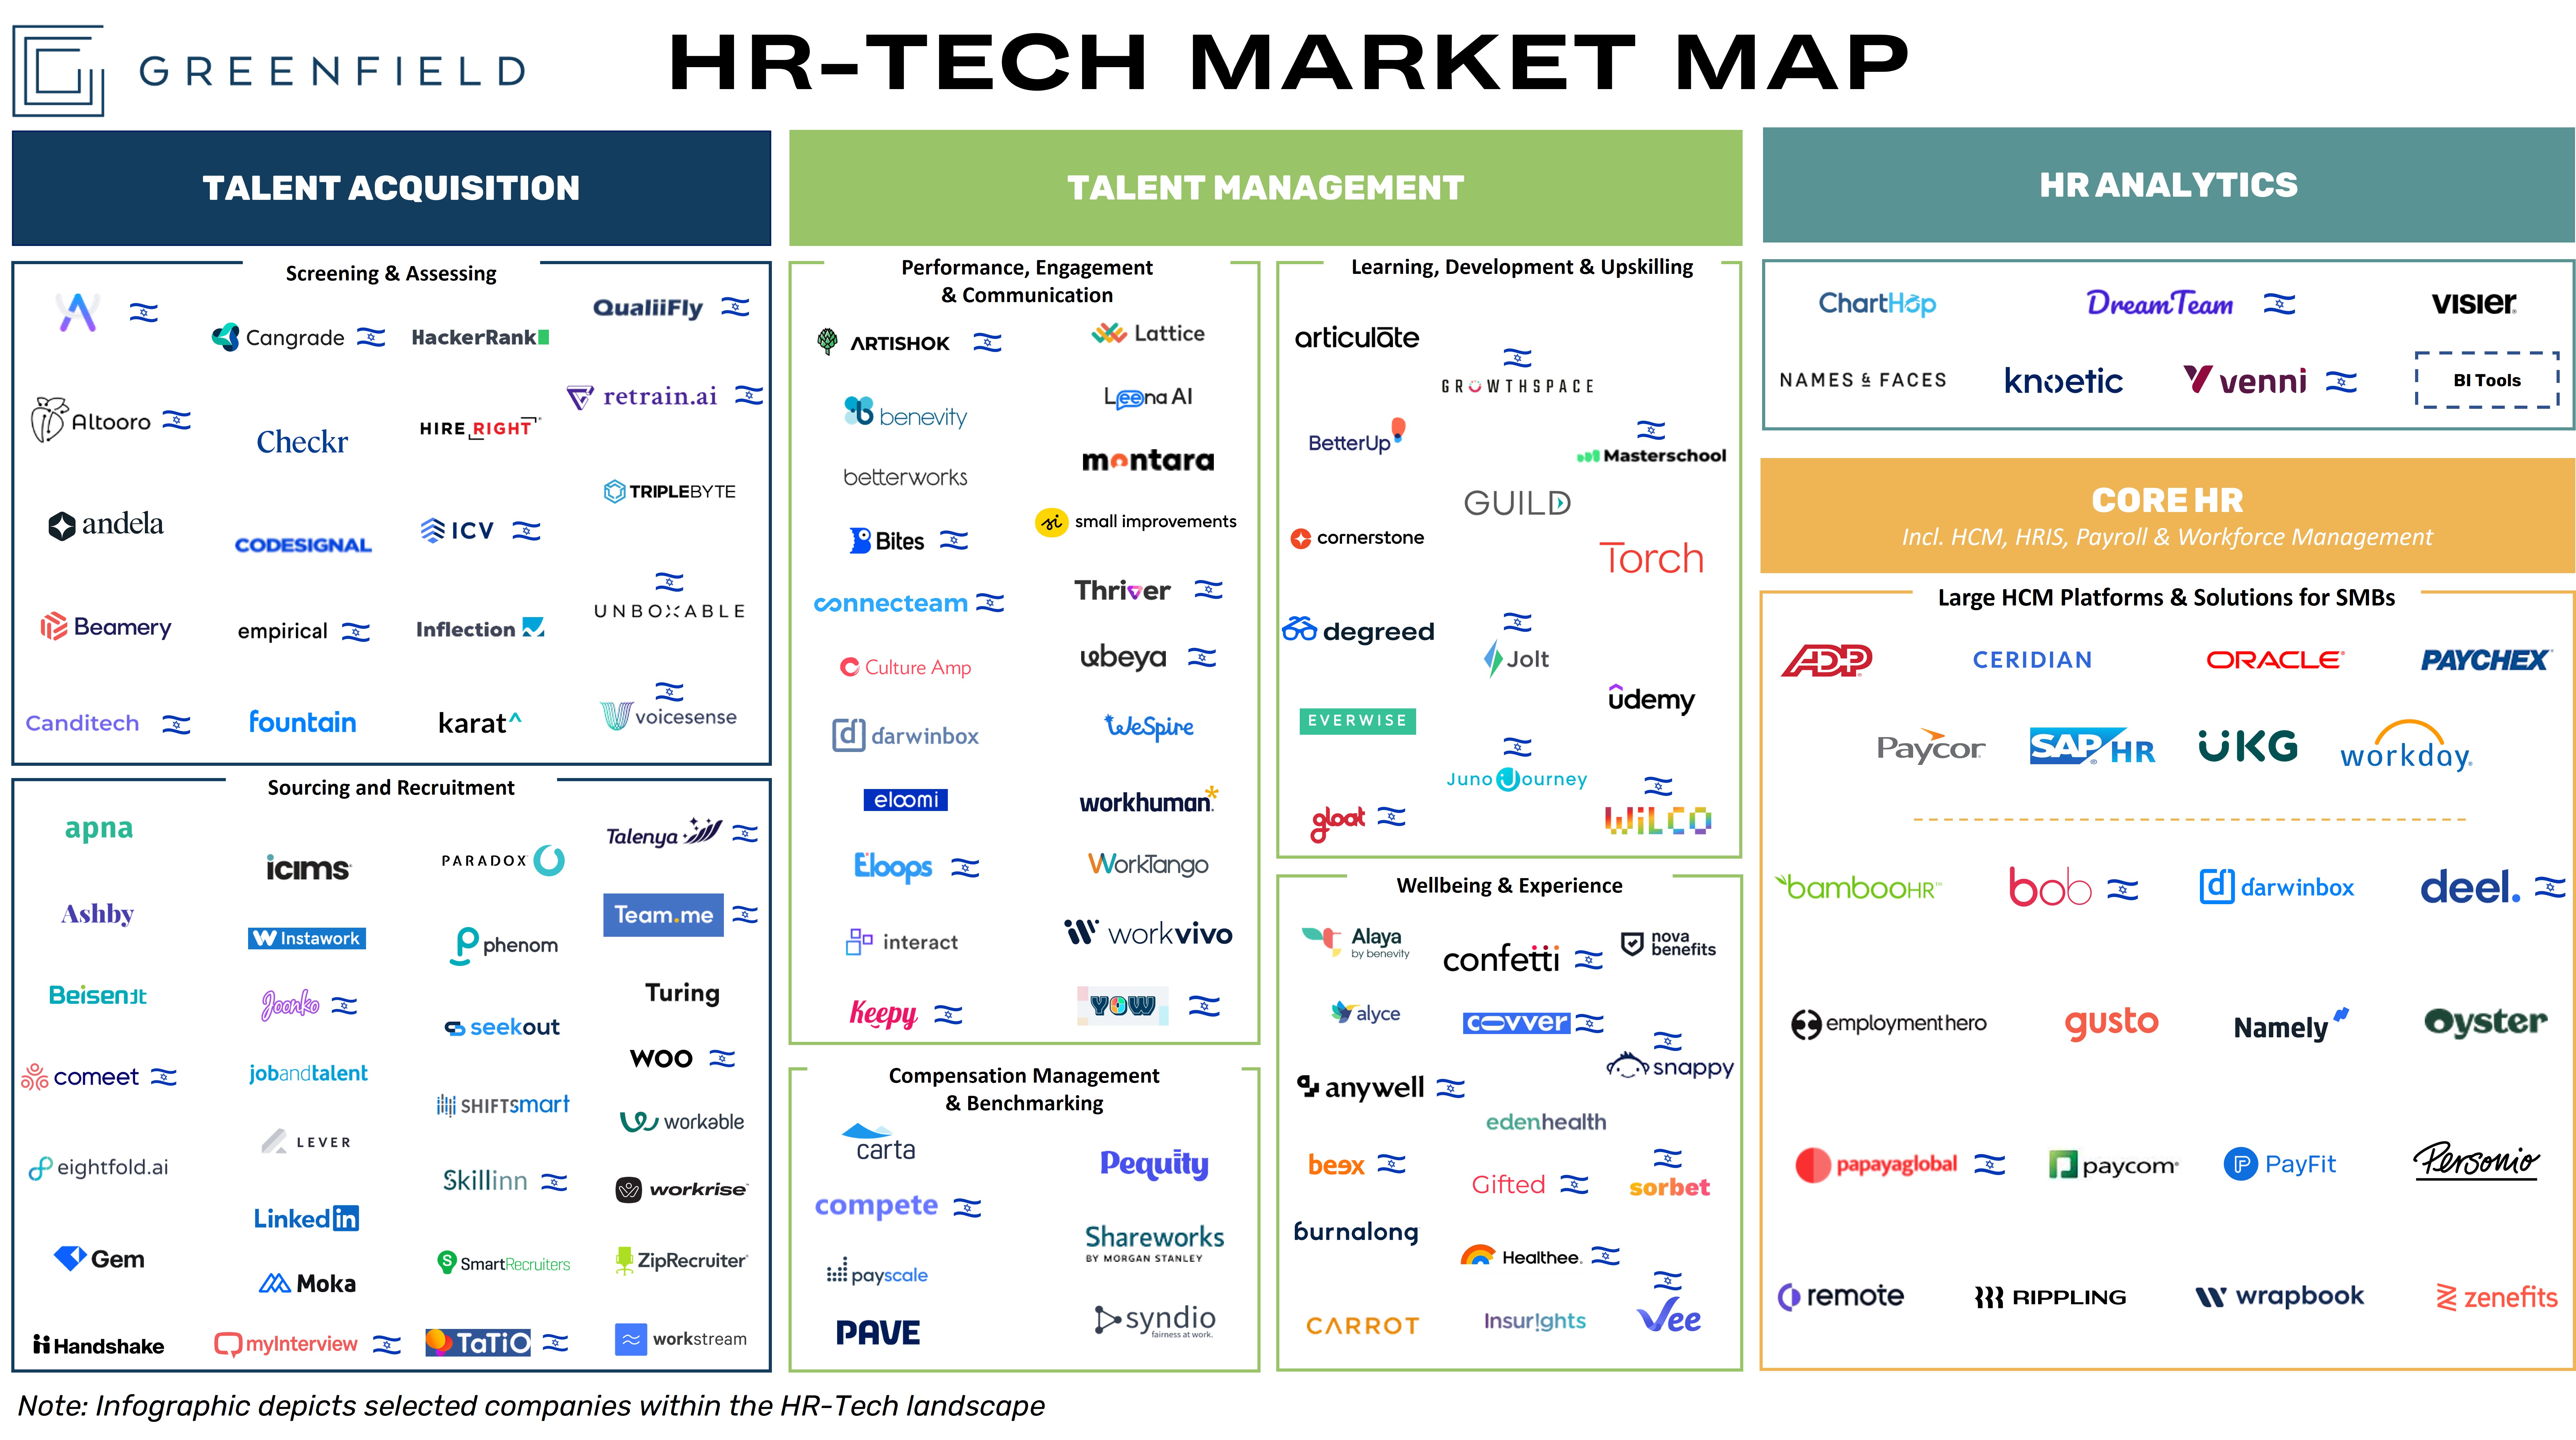 HR Technology Market Map | By Greenfield | RFP360 RFP management software